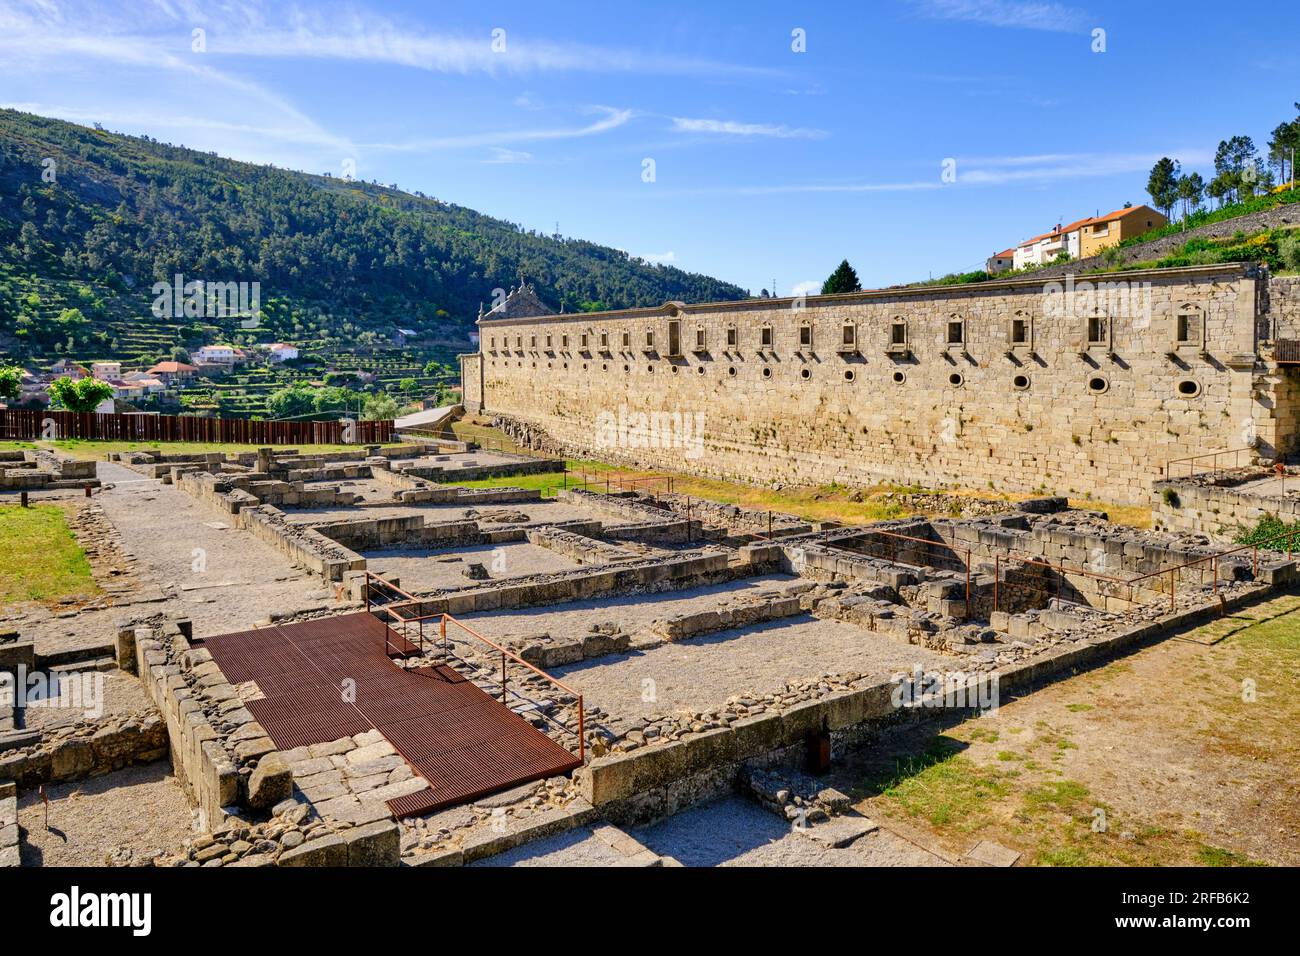 The construction of the Monastery of Sao Joao de Tarouca began in 1154, this being the first male Cistercian monastery built in Portuguese territory. Stock Photo